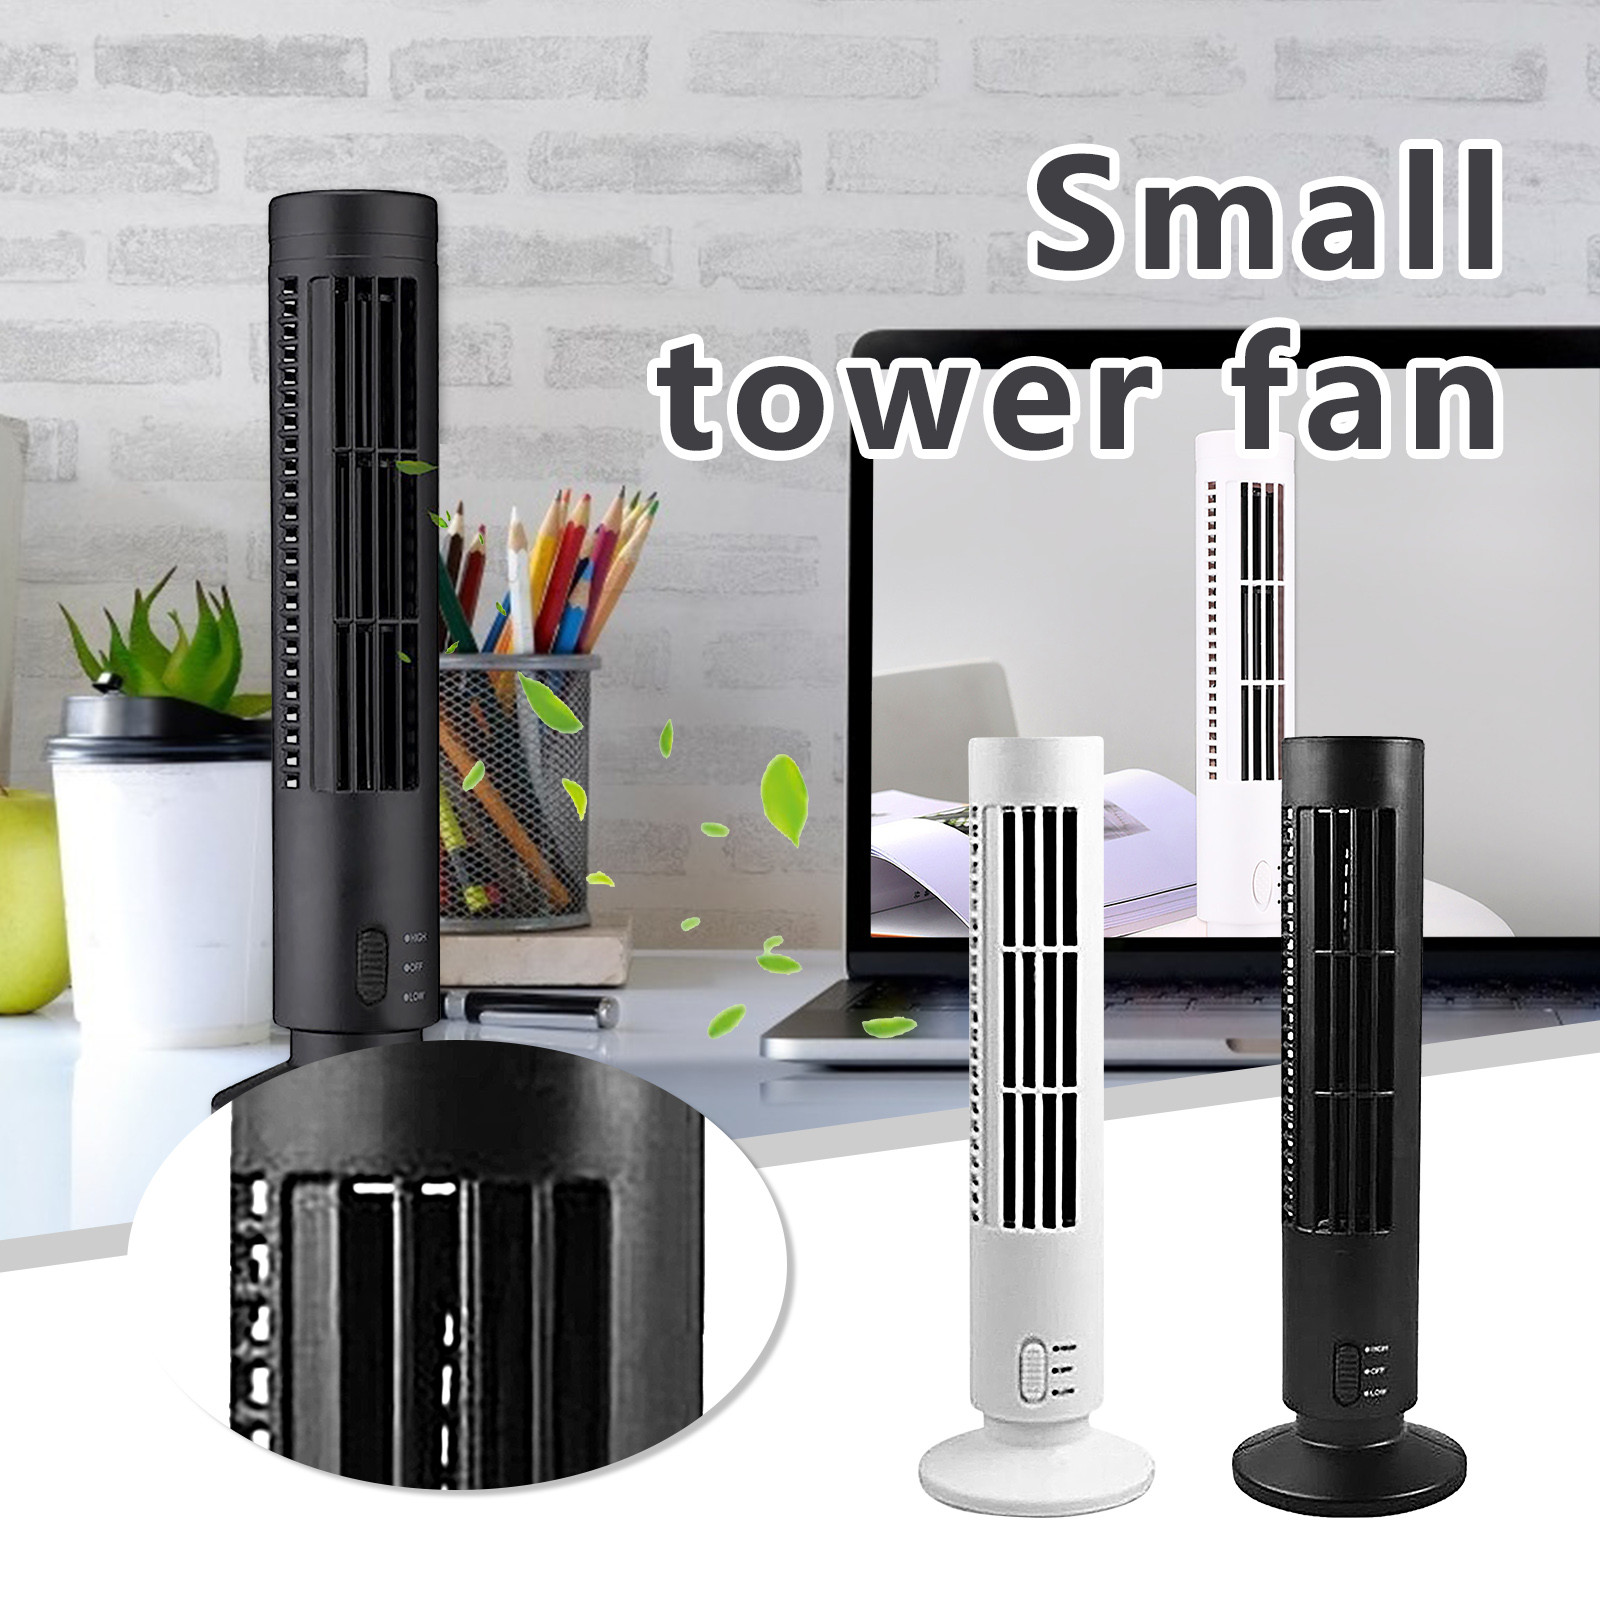 Wovilon Tower Fan for Bedroom, 24ft/s Velocity Quiet Cooling Fan, 90° Oscillating Fans for Indoors, Table Fan, Bladeless Fan, Standing Floor Fans, White - image 5 of 6